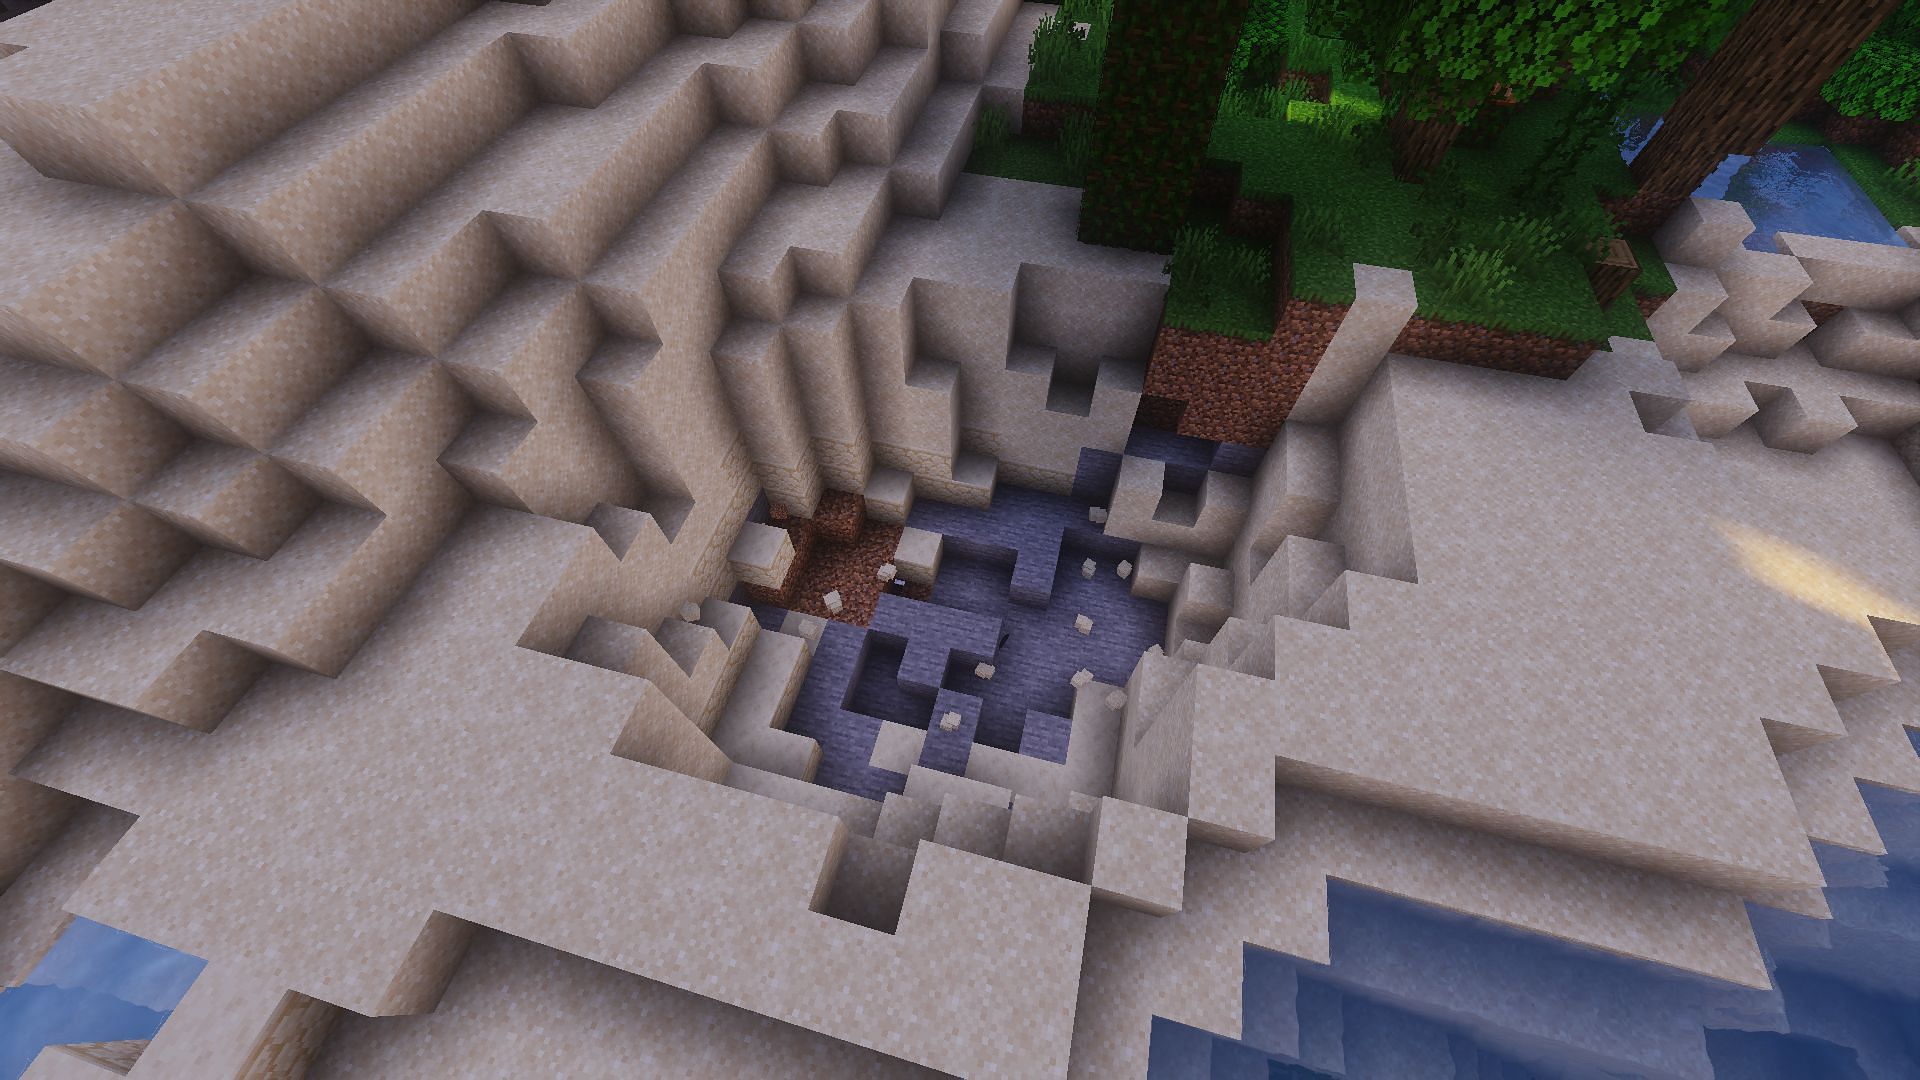 The whole in the ground resulting from a four TNT bed trap (Image via Minecraft)